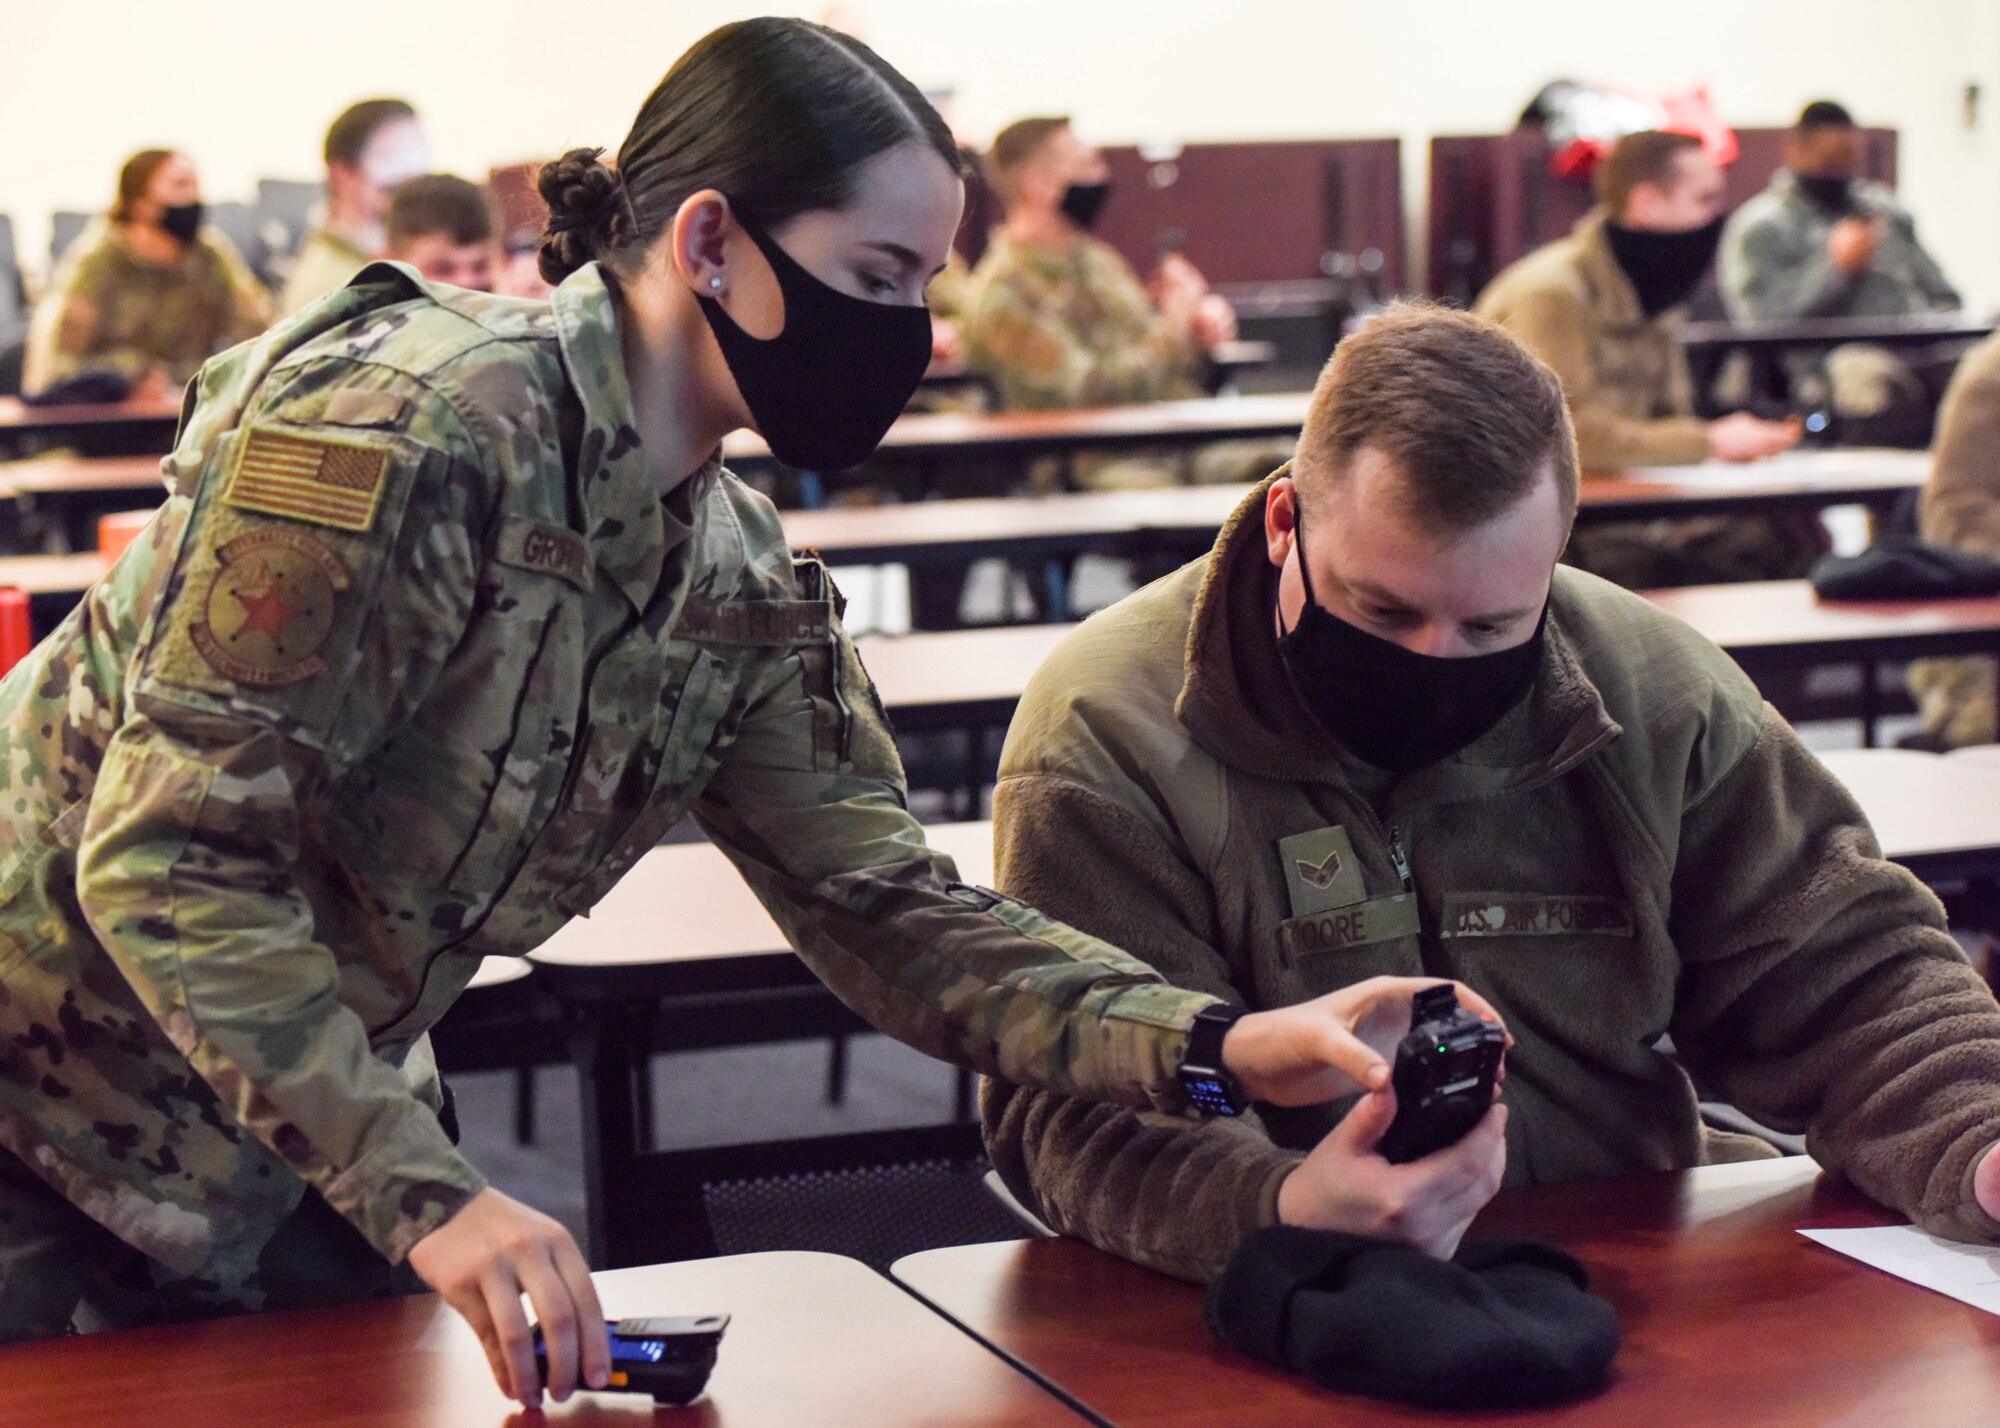 U.S. Air Force Airman 1st Class Kelly Griffith, a 673d Security Forces Squadron patrolman, and Senior Airman Joshua Moore, 673d SFS Alarm Monitor, become familiar with a new body camera device during a training day Jan. 6, 2021, at Joint Base Elmendorf-Richardson, Alaska. The 673d SFS has begun integrating 60 new, high-tech body cameras into daily operations after the adaptable technology reached a point of not only being a reliable safety and training instrument, but a multifunctional accountability tool serving all. (U.S. Air Force photo by Senior Airman Crystal A. Jenkins)